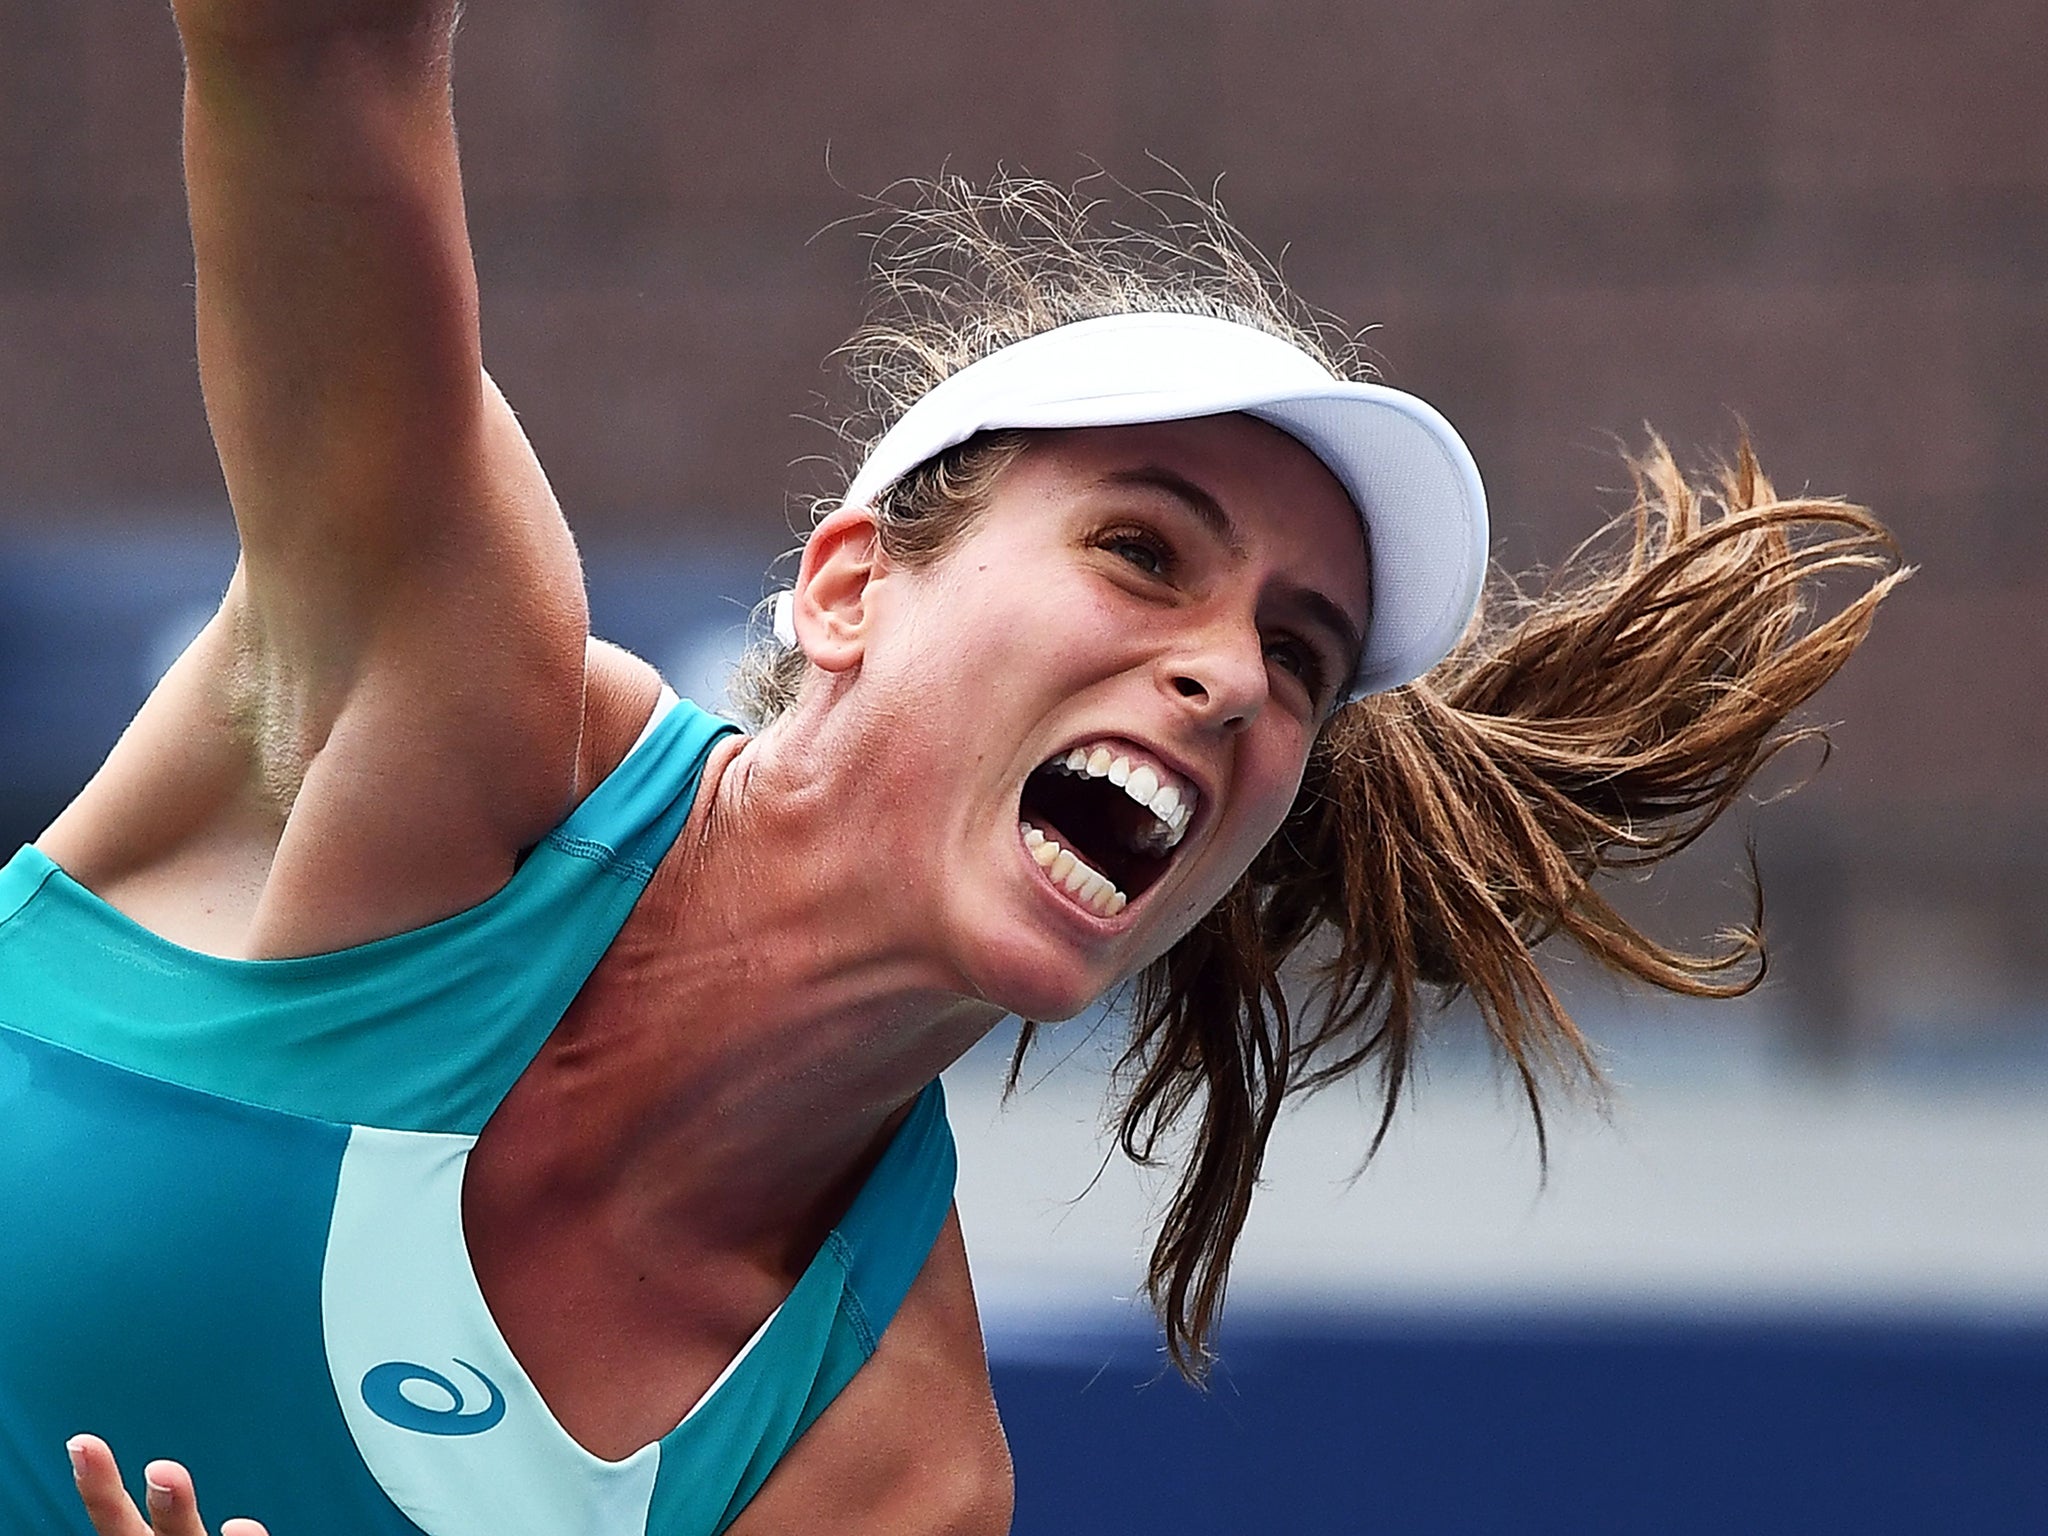 Konta was considered among the favourites to reach the final stages at Flushing Meadows